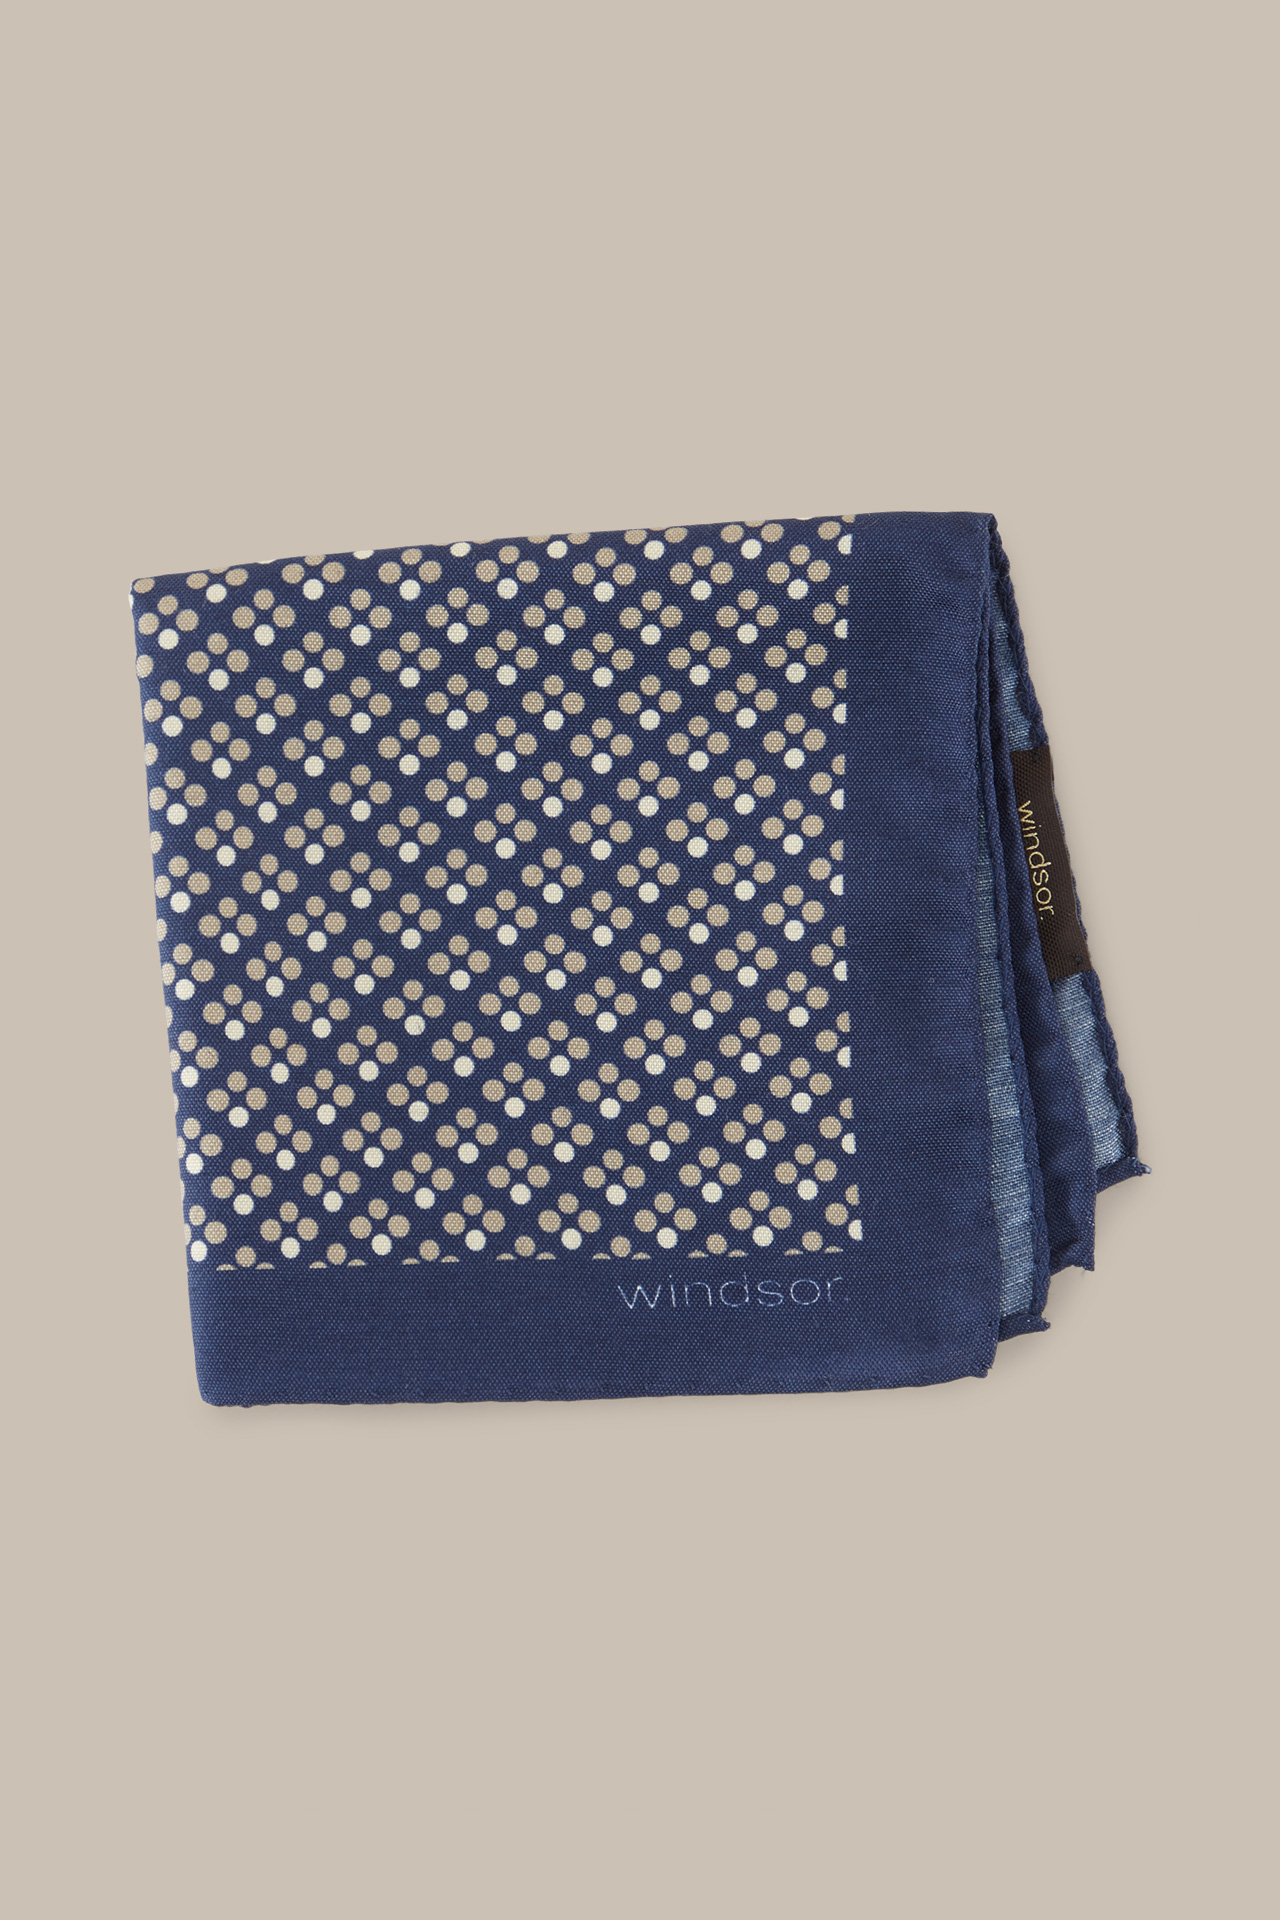 Handkerchief with Silk in Navy, Cream and Beige Patterned